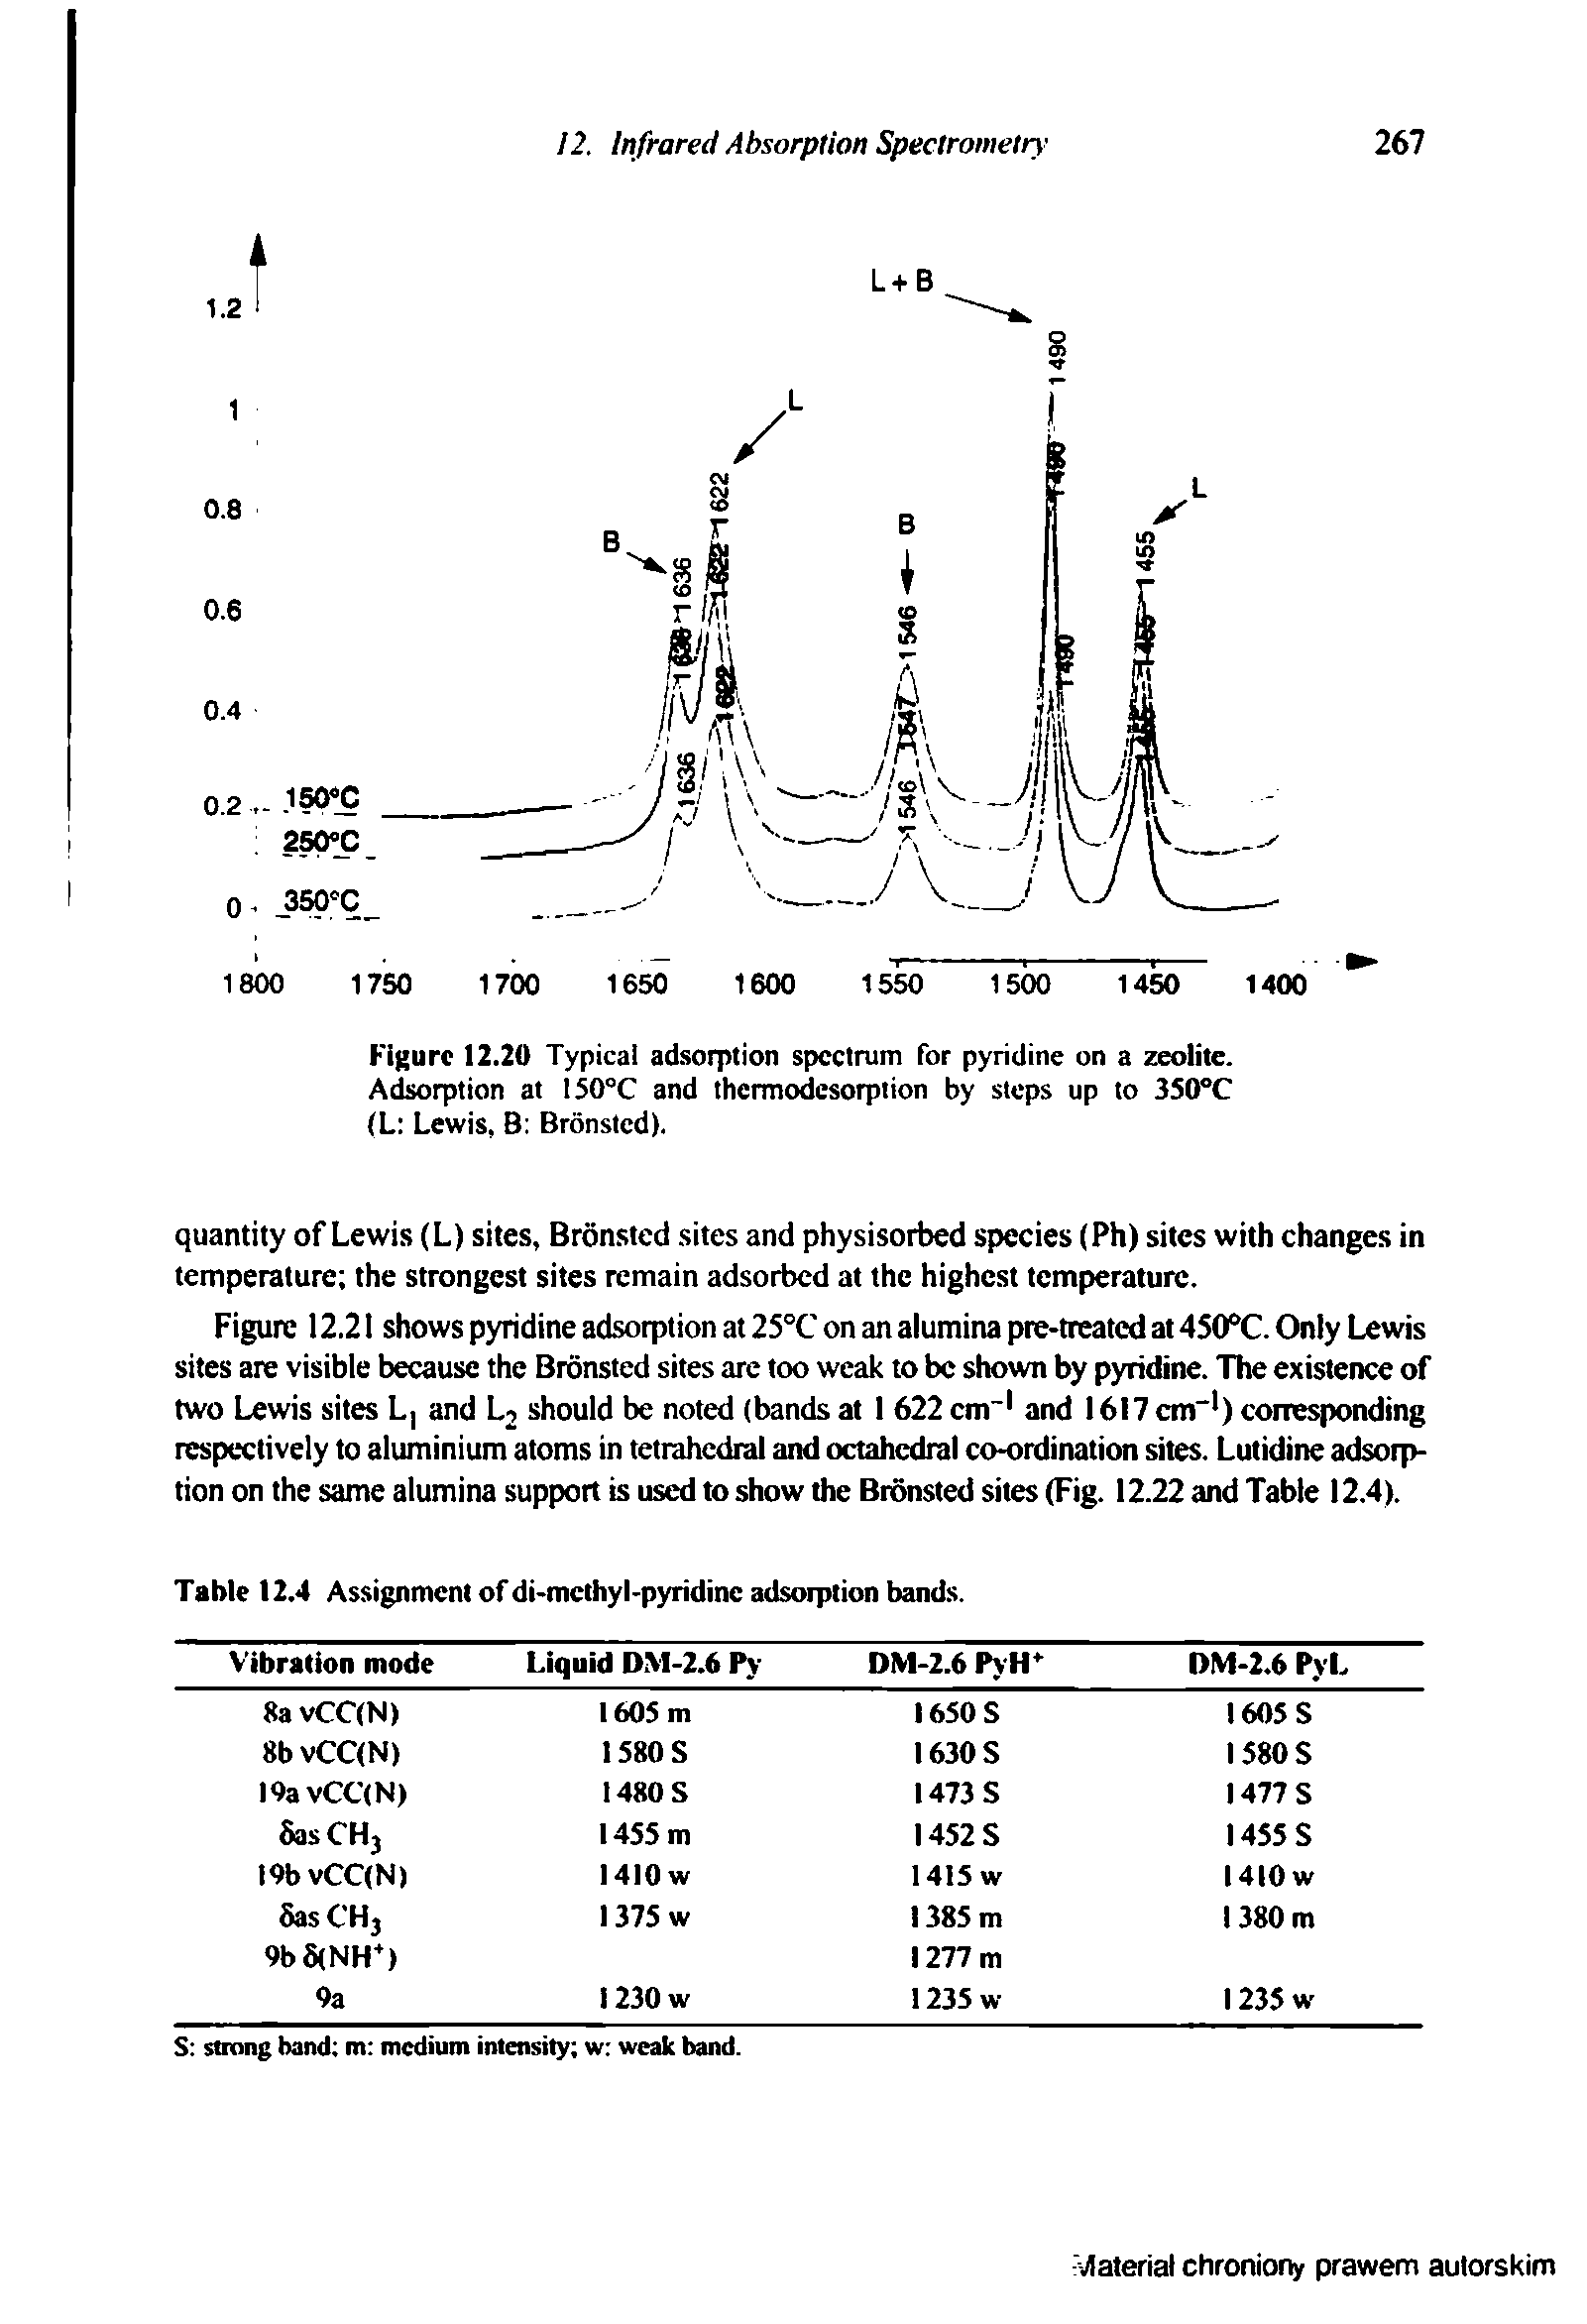 Figure 12.20 Typical adsorption spectrum for pyridine on a zeolite. Adsorption at I50°C and thermodcsorption by steps up to 350 C (L Lewis, B Bronsicd).